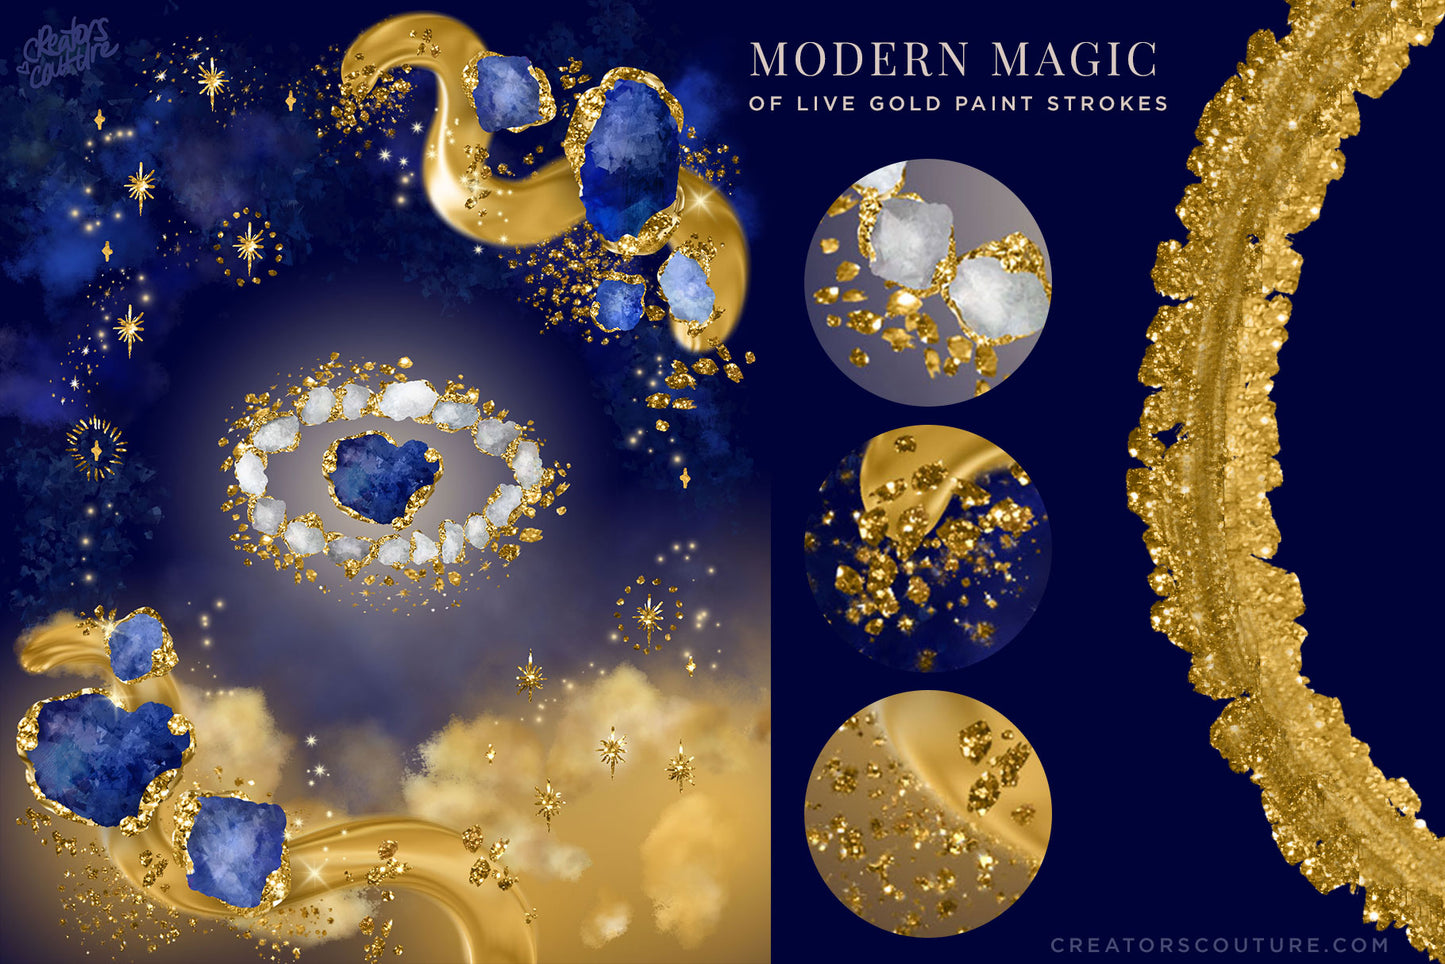 mystical gold paint stroke artwork made with 24k gold photoshop brushes 2